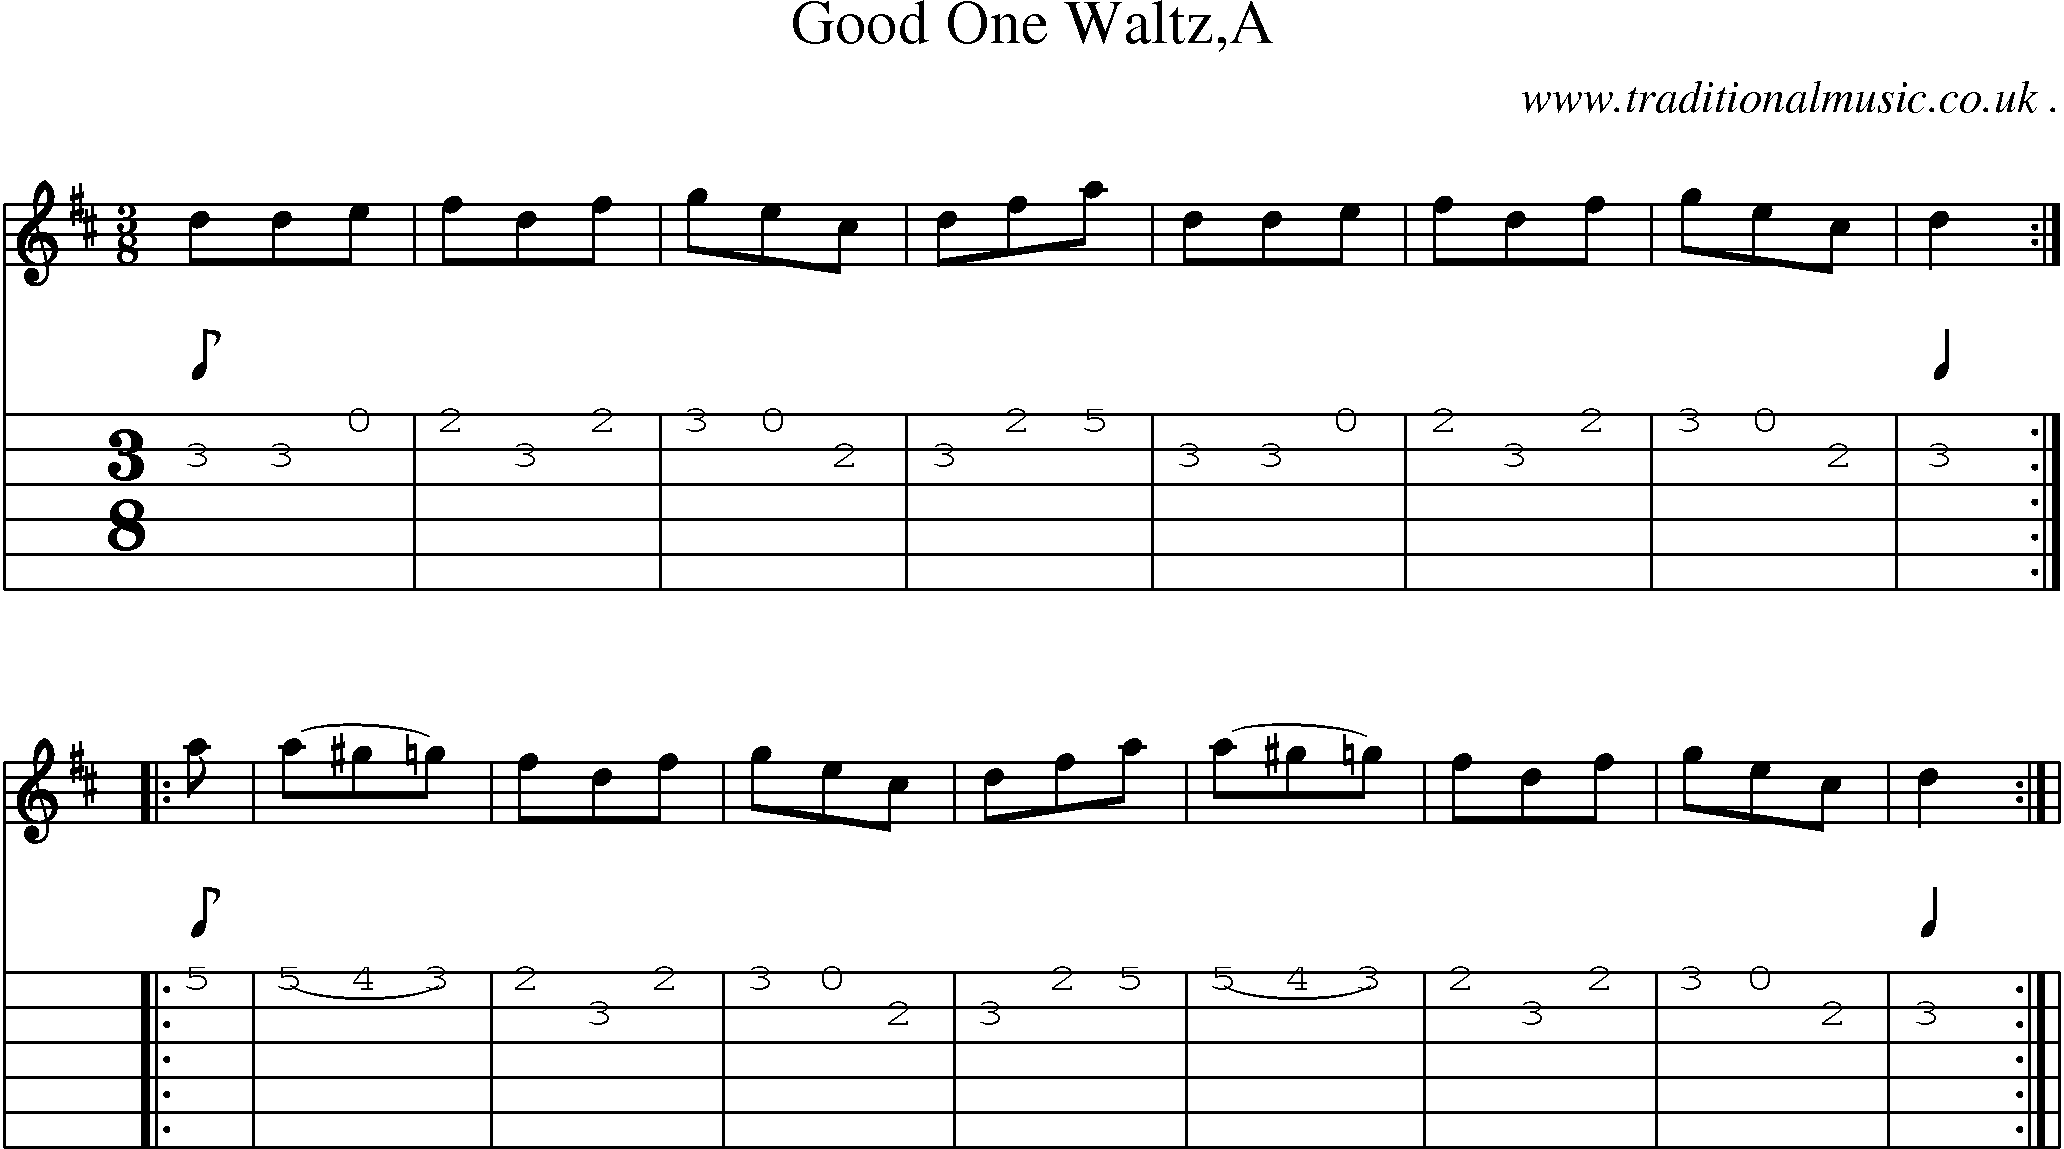 Sheet-Music and Guitar Tabs for Good One Waltza